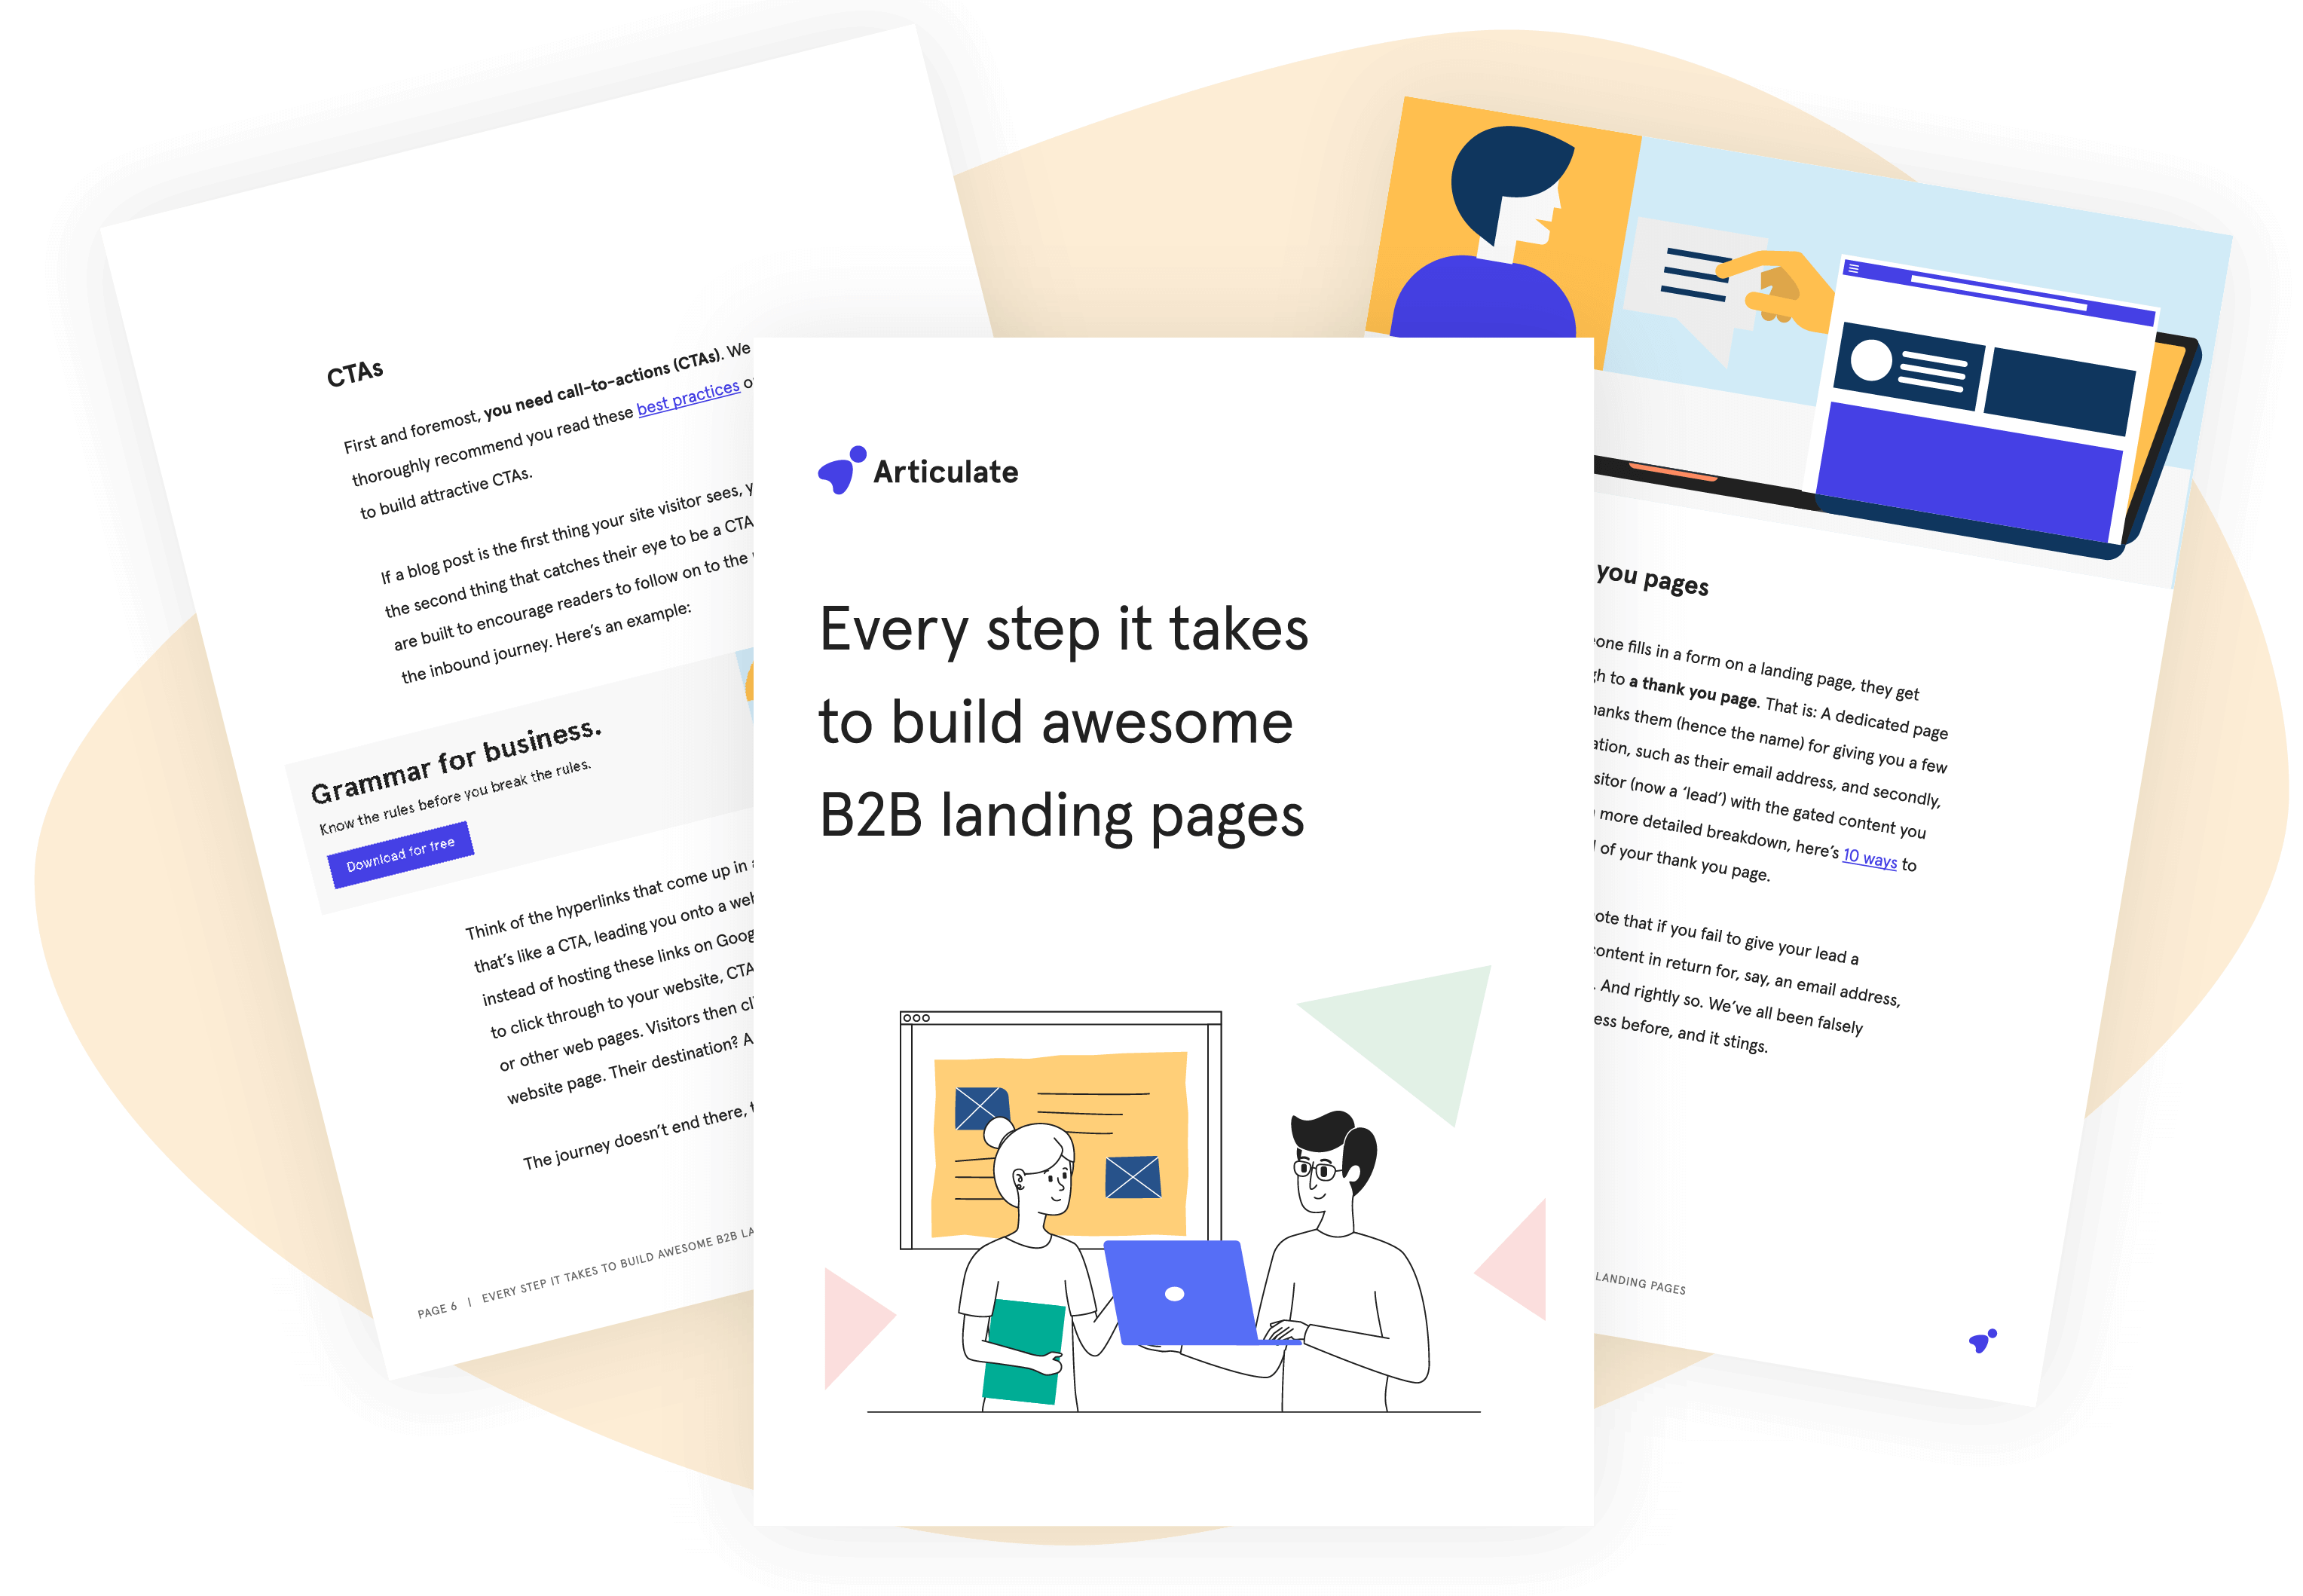 How to build awesome B2B landing pages